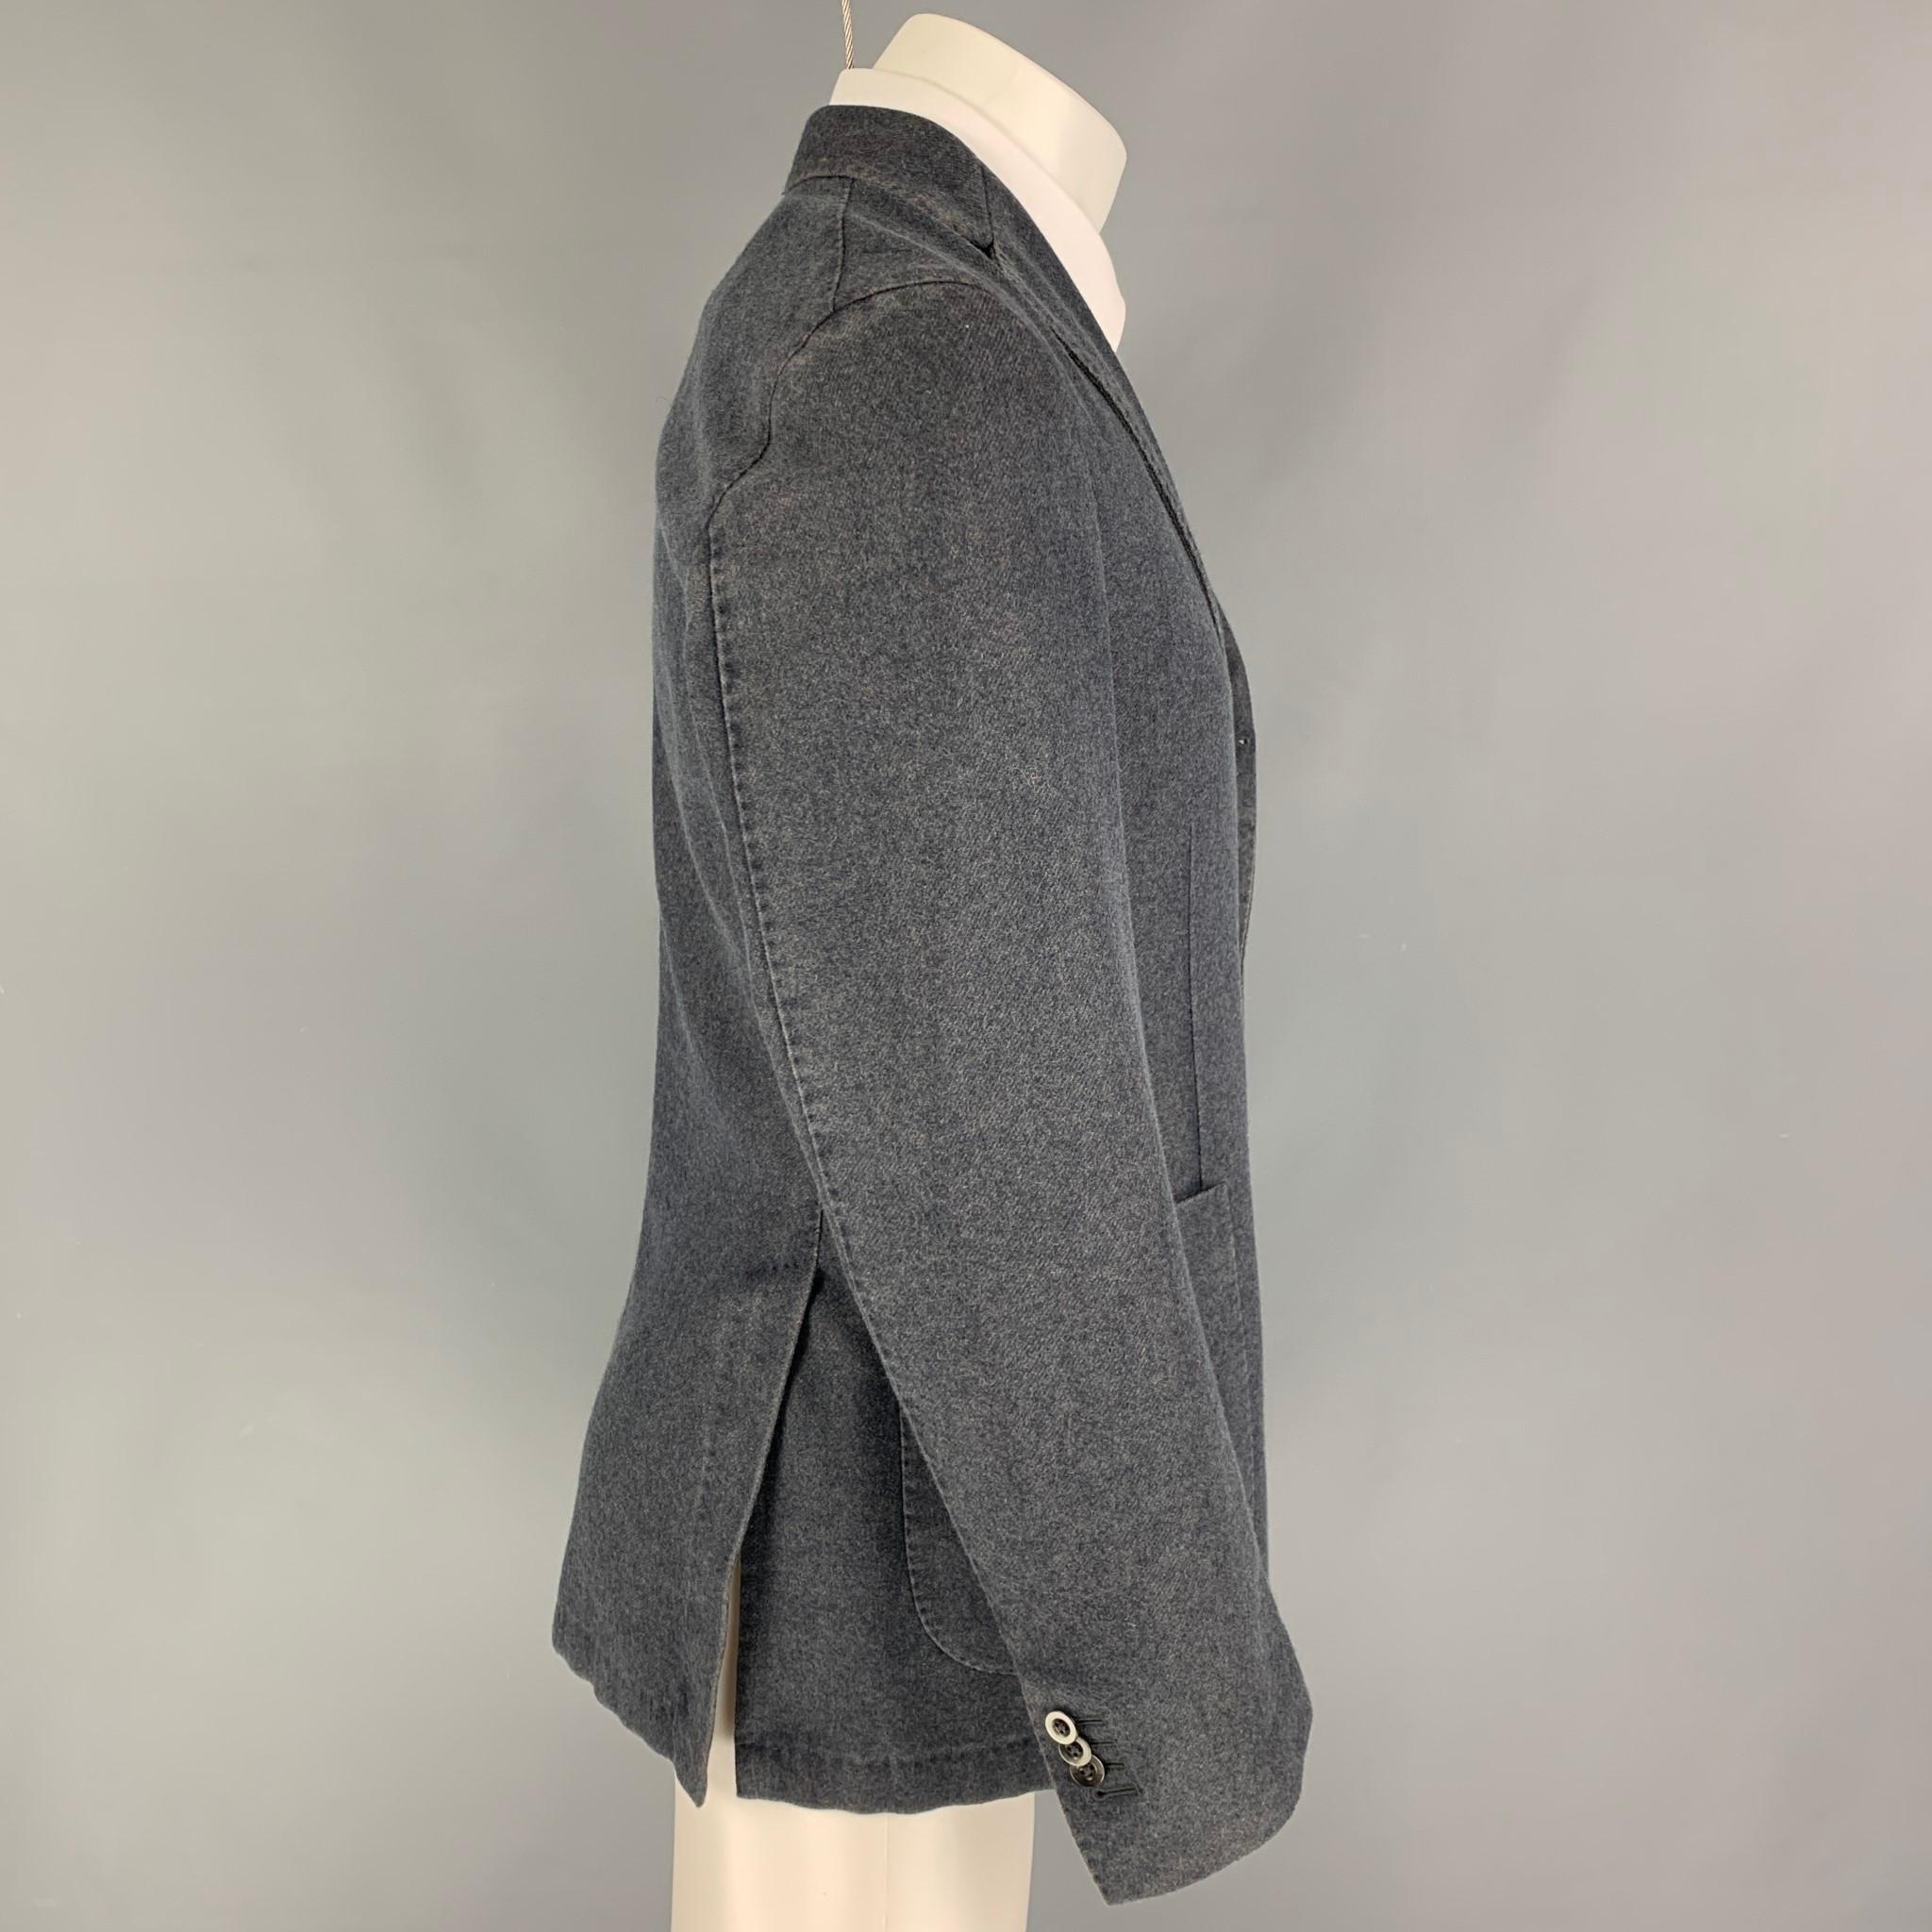 BOGLIOLI sport coat comes in a grey heather wool / polyester featuring a notch lapel, patch pockets, and a double button closure. Made in Italy. 

Very Good Pre-Owned Condition.
Marked: 48

Measurements:

Shoulder: 17.5 in.
Chest: 38 in.
Sleeve: 26